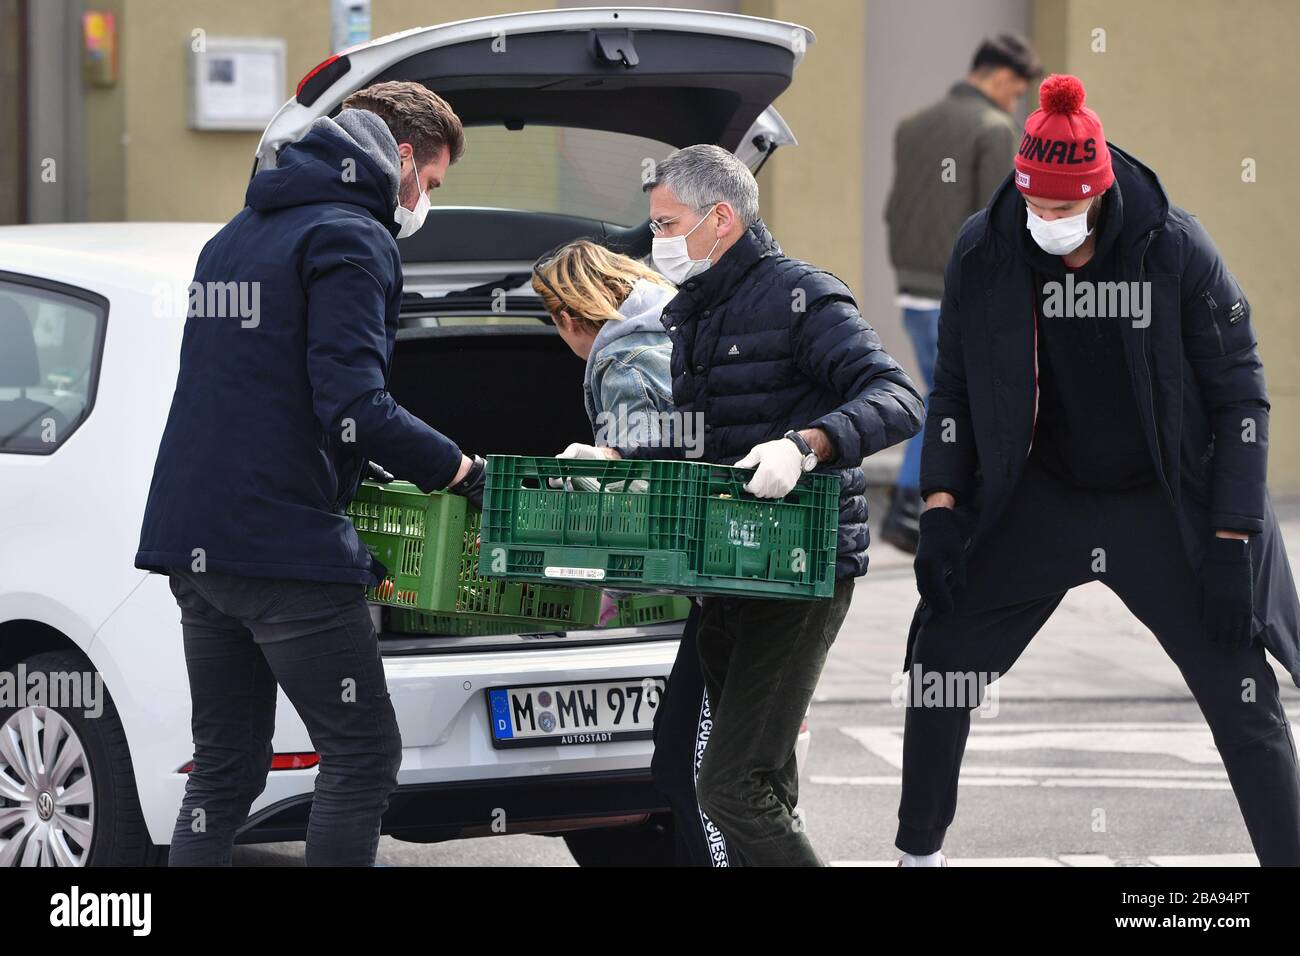 Herbert HAINER (President FC Bayern Munich, withte), DANILO BARTHEL (FCB, right) and Marko PESIC (left) are lifting boxes with knickers from a car - they wear face masks and protective masks. FC Bayern Munich Basketball is helping the Muenchener Tafel on 26.03.2020 in the wholesale market in Muenchen. @Sven Simon Photo Agency. GmbH & Co. Press Photo KG # Prinzess-Luise-Str. 41 # 45479 M uelheim / R uhr # Tel. 0208/9413250 # Fax. 0208/9413260 # GLS Bank # BLZ 430 609 67 # Kto. 4030 025 100 # IBAN DE75 4306 0967 4030 0251 00 # BIC GENODEM1GLS # www.svensimon.net. | usage worldwide Stock Photo